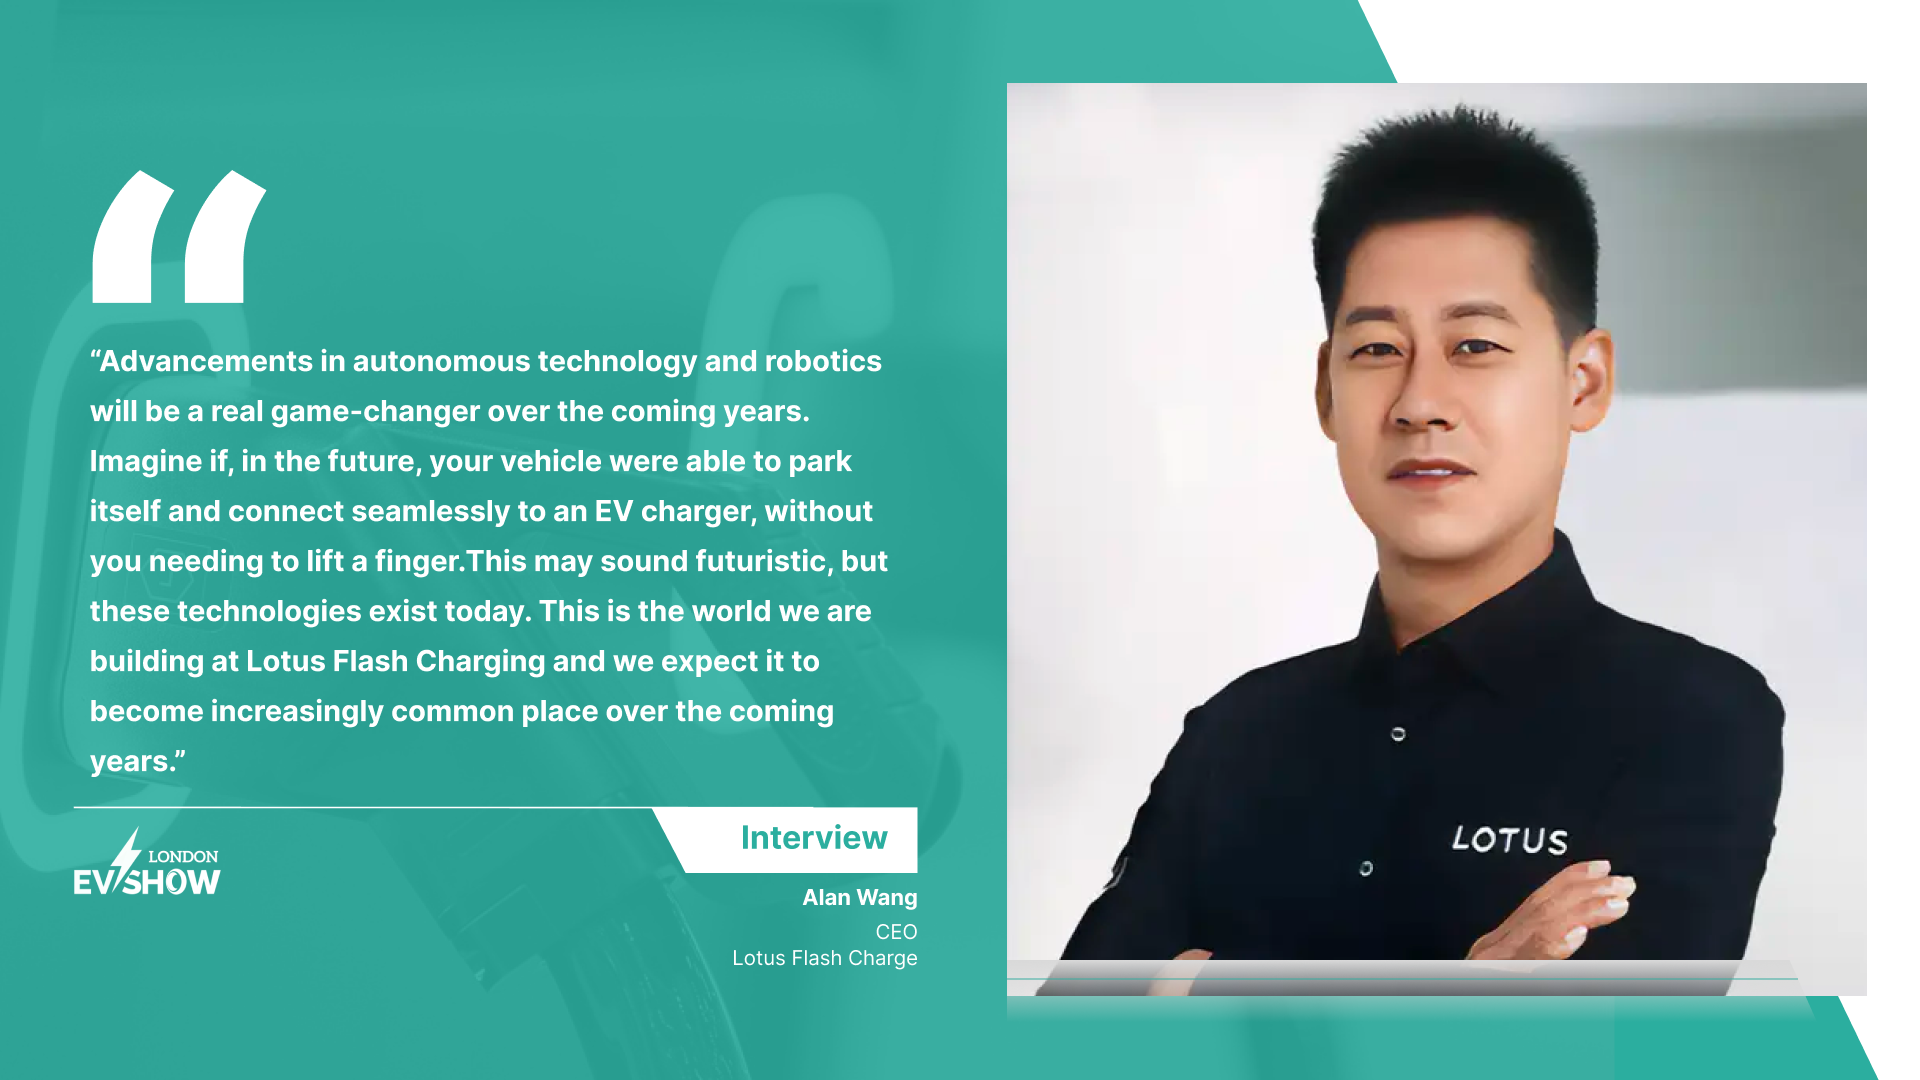 Insightful Q&A with Alan Wang, Vice-President, Lotus Technology & CEO, Lotus Flash Charge